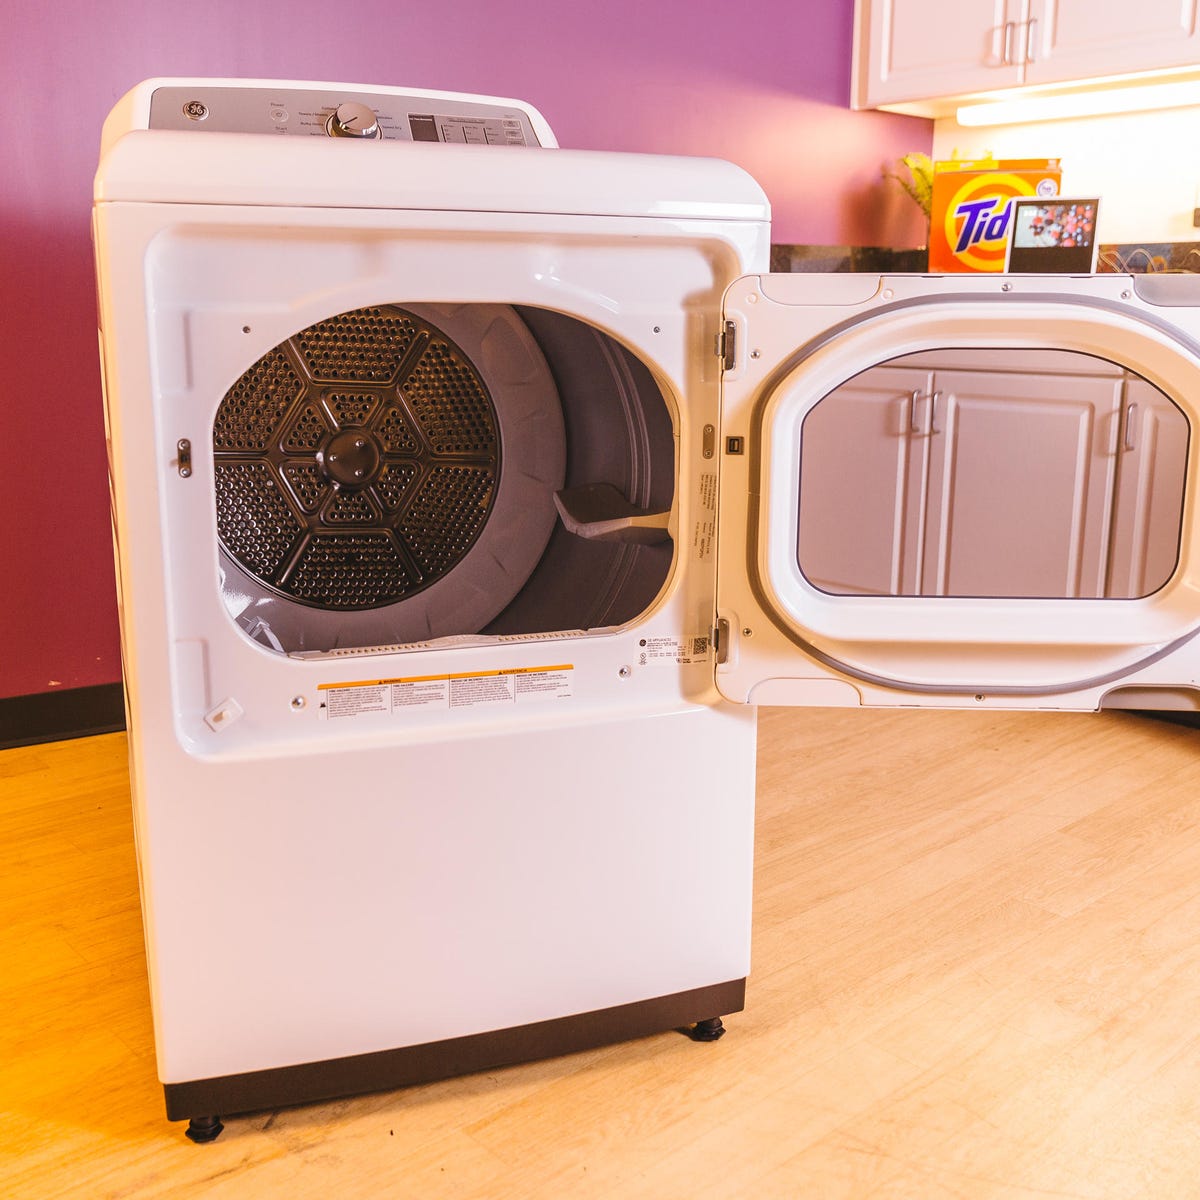 3 easy tips to speed up your dryer - CNET